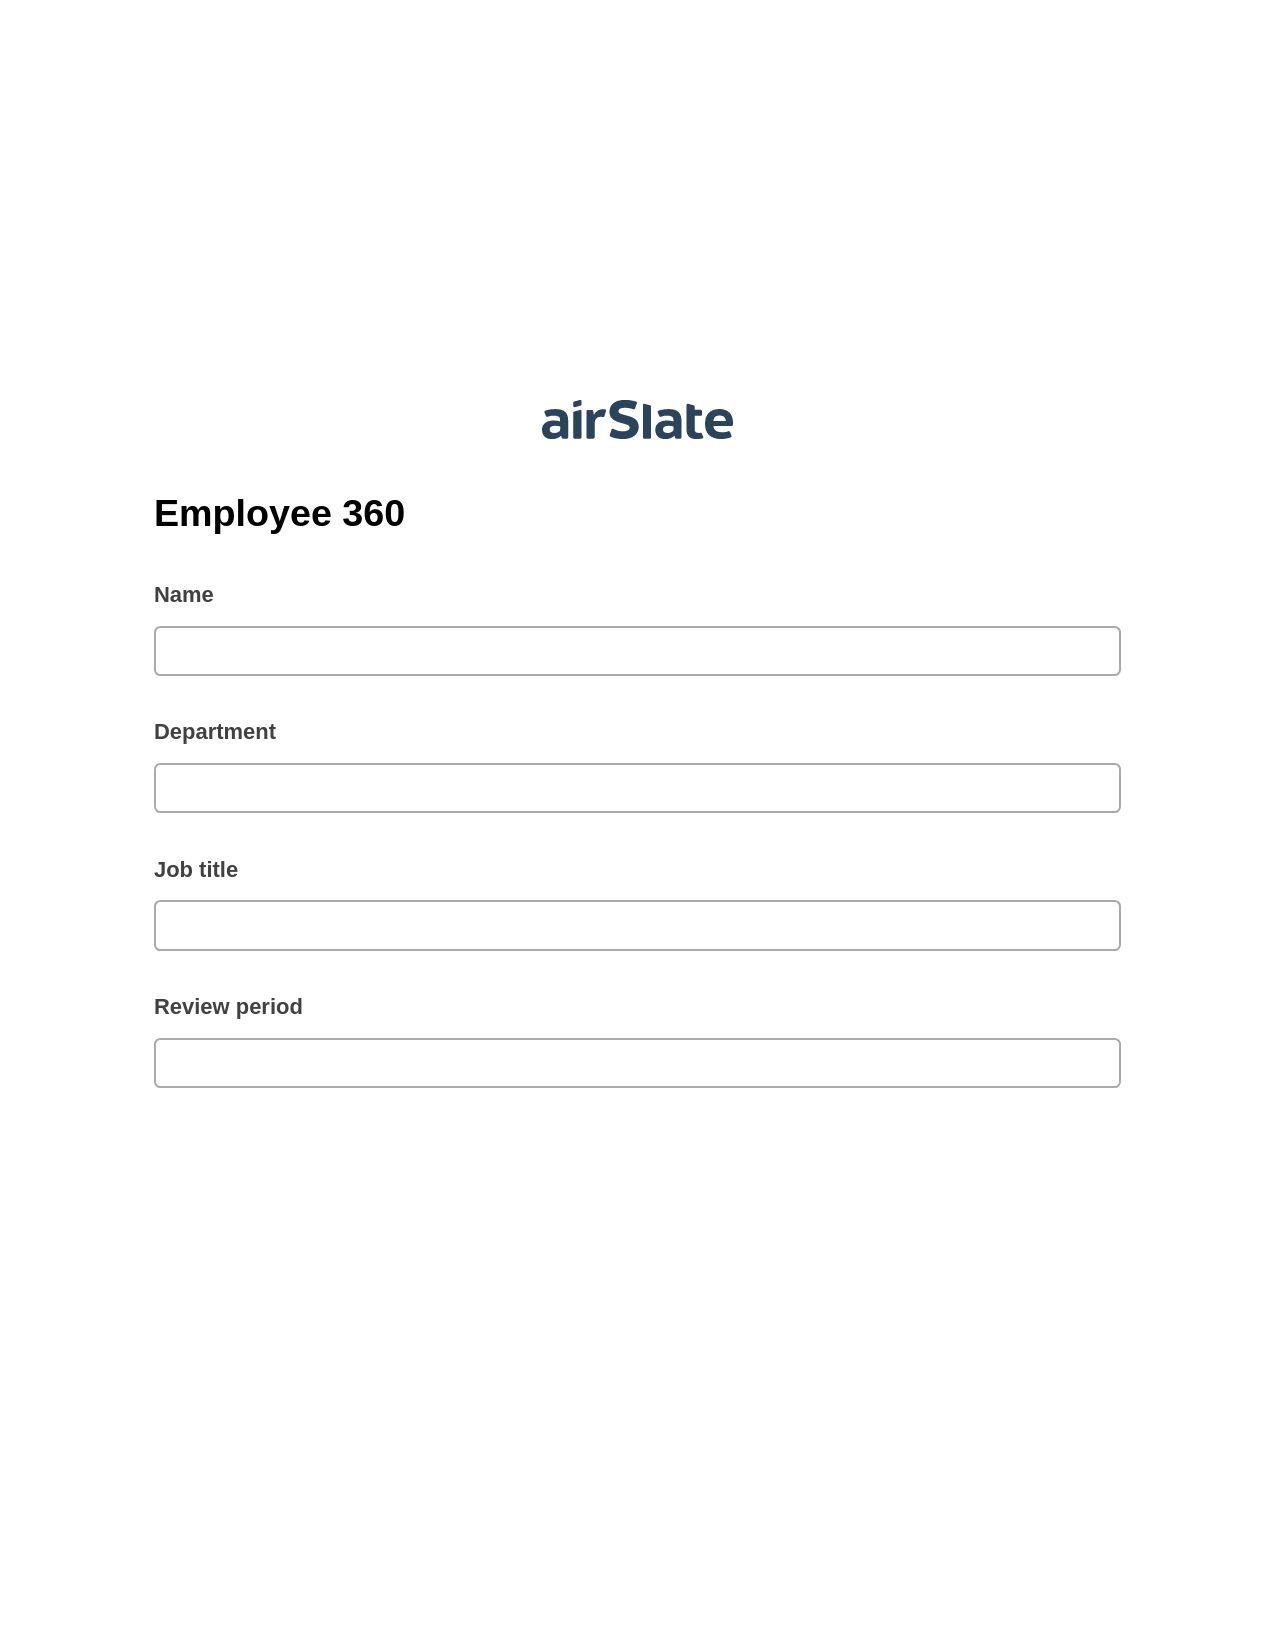 Multirole Employee 360 Pre-fill from CSV File Bot, Reminder Bot, Archive to SharePoint Folder Bot